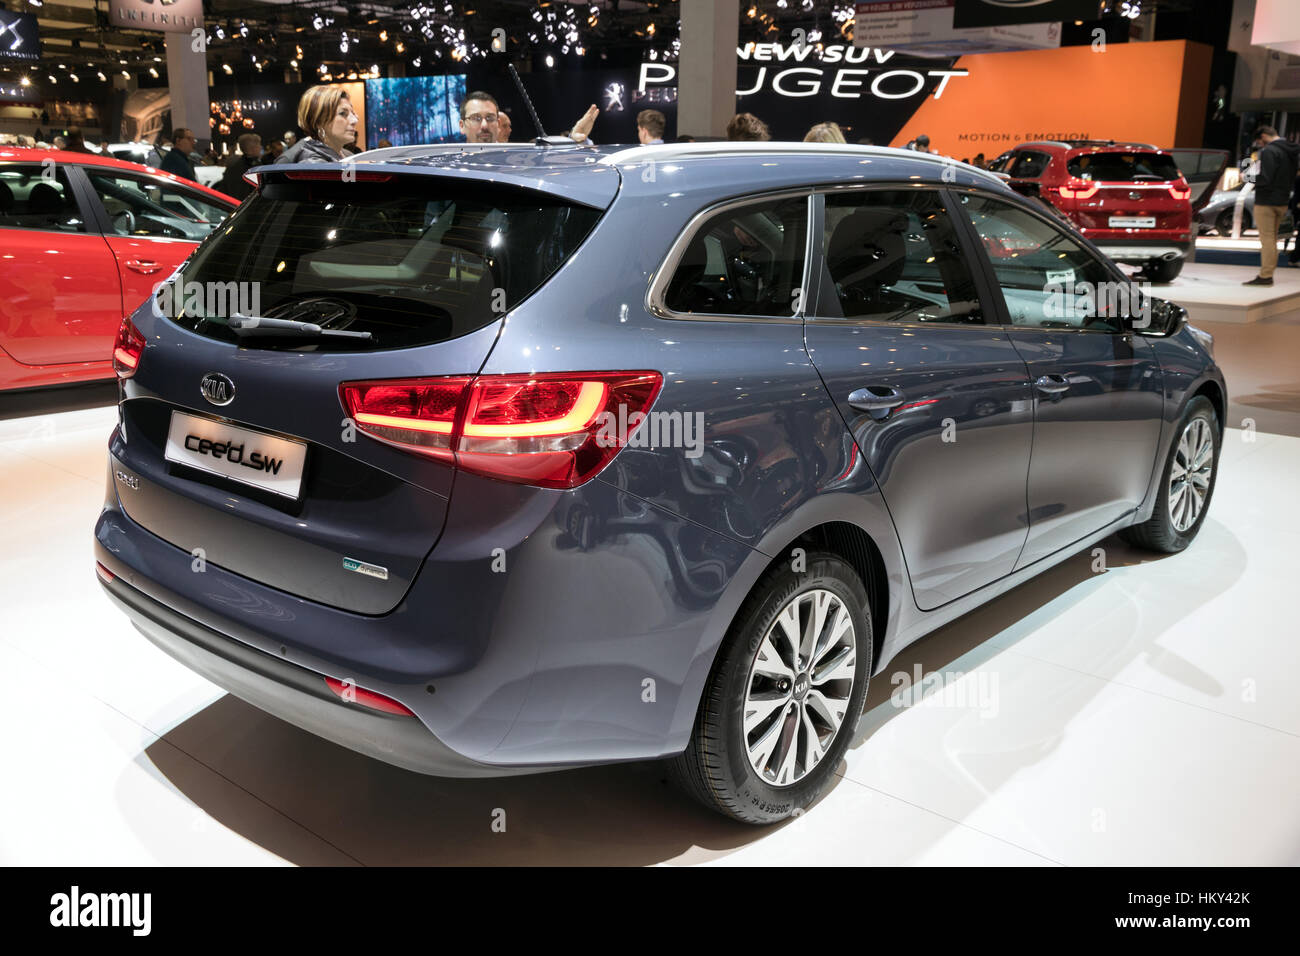 BRUSSELS - JAN 19, 2017: Kia Cee'd SportsWagon on display at the Motor Show  Brussels Stock Photo - Alamy